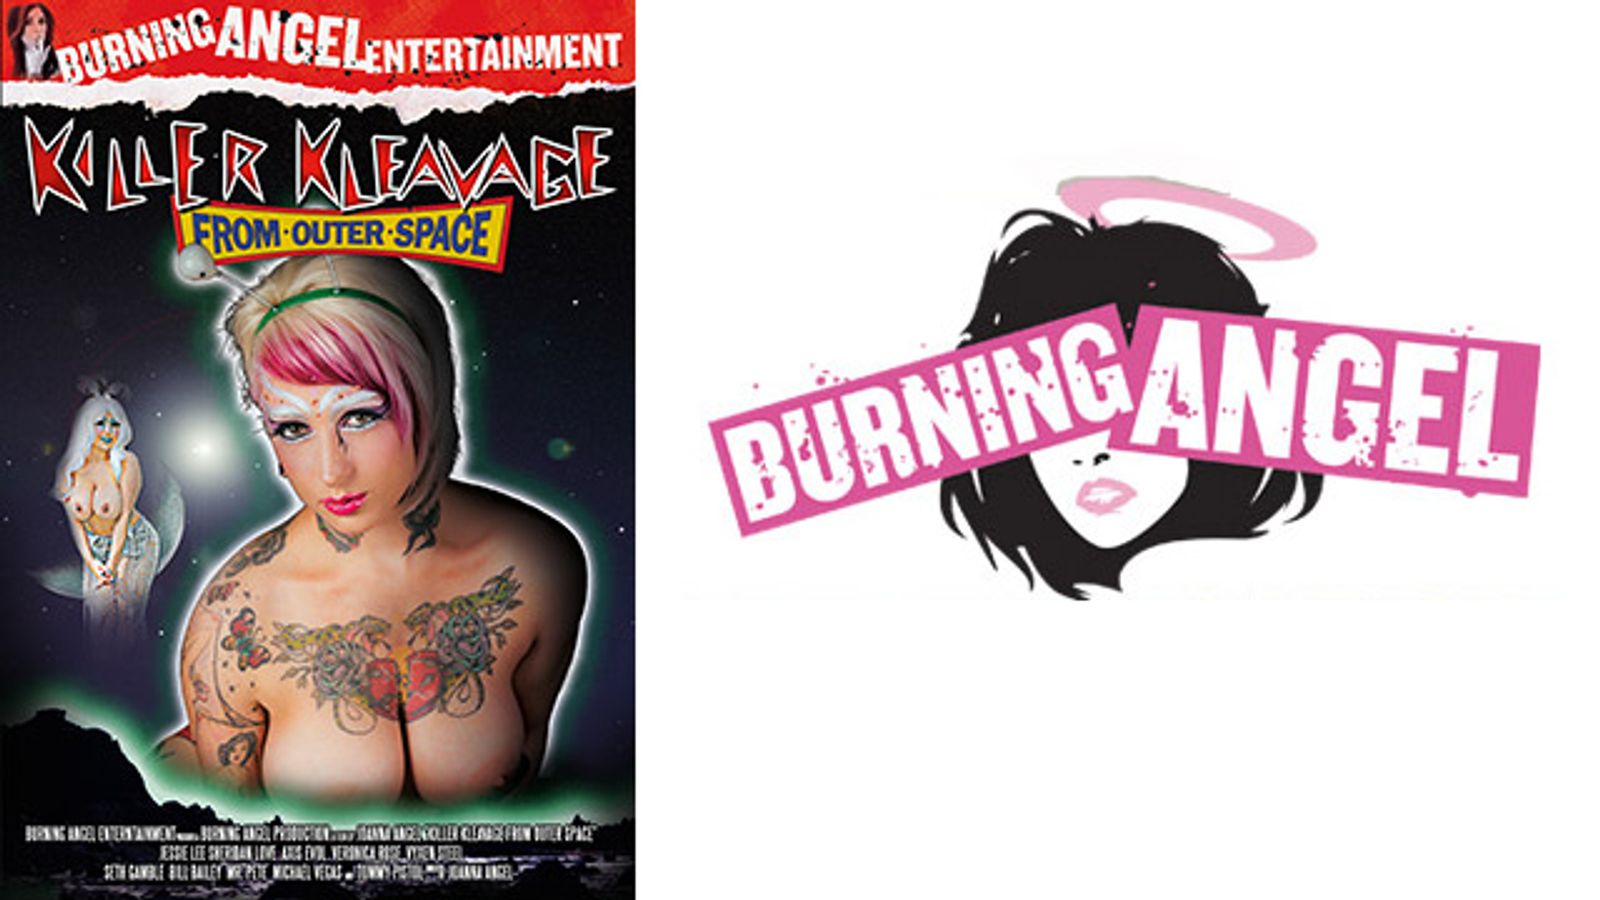 BurningAngel.com to Debut 'Killer Kleavage from Outer Space'